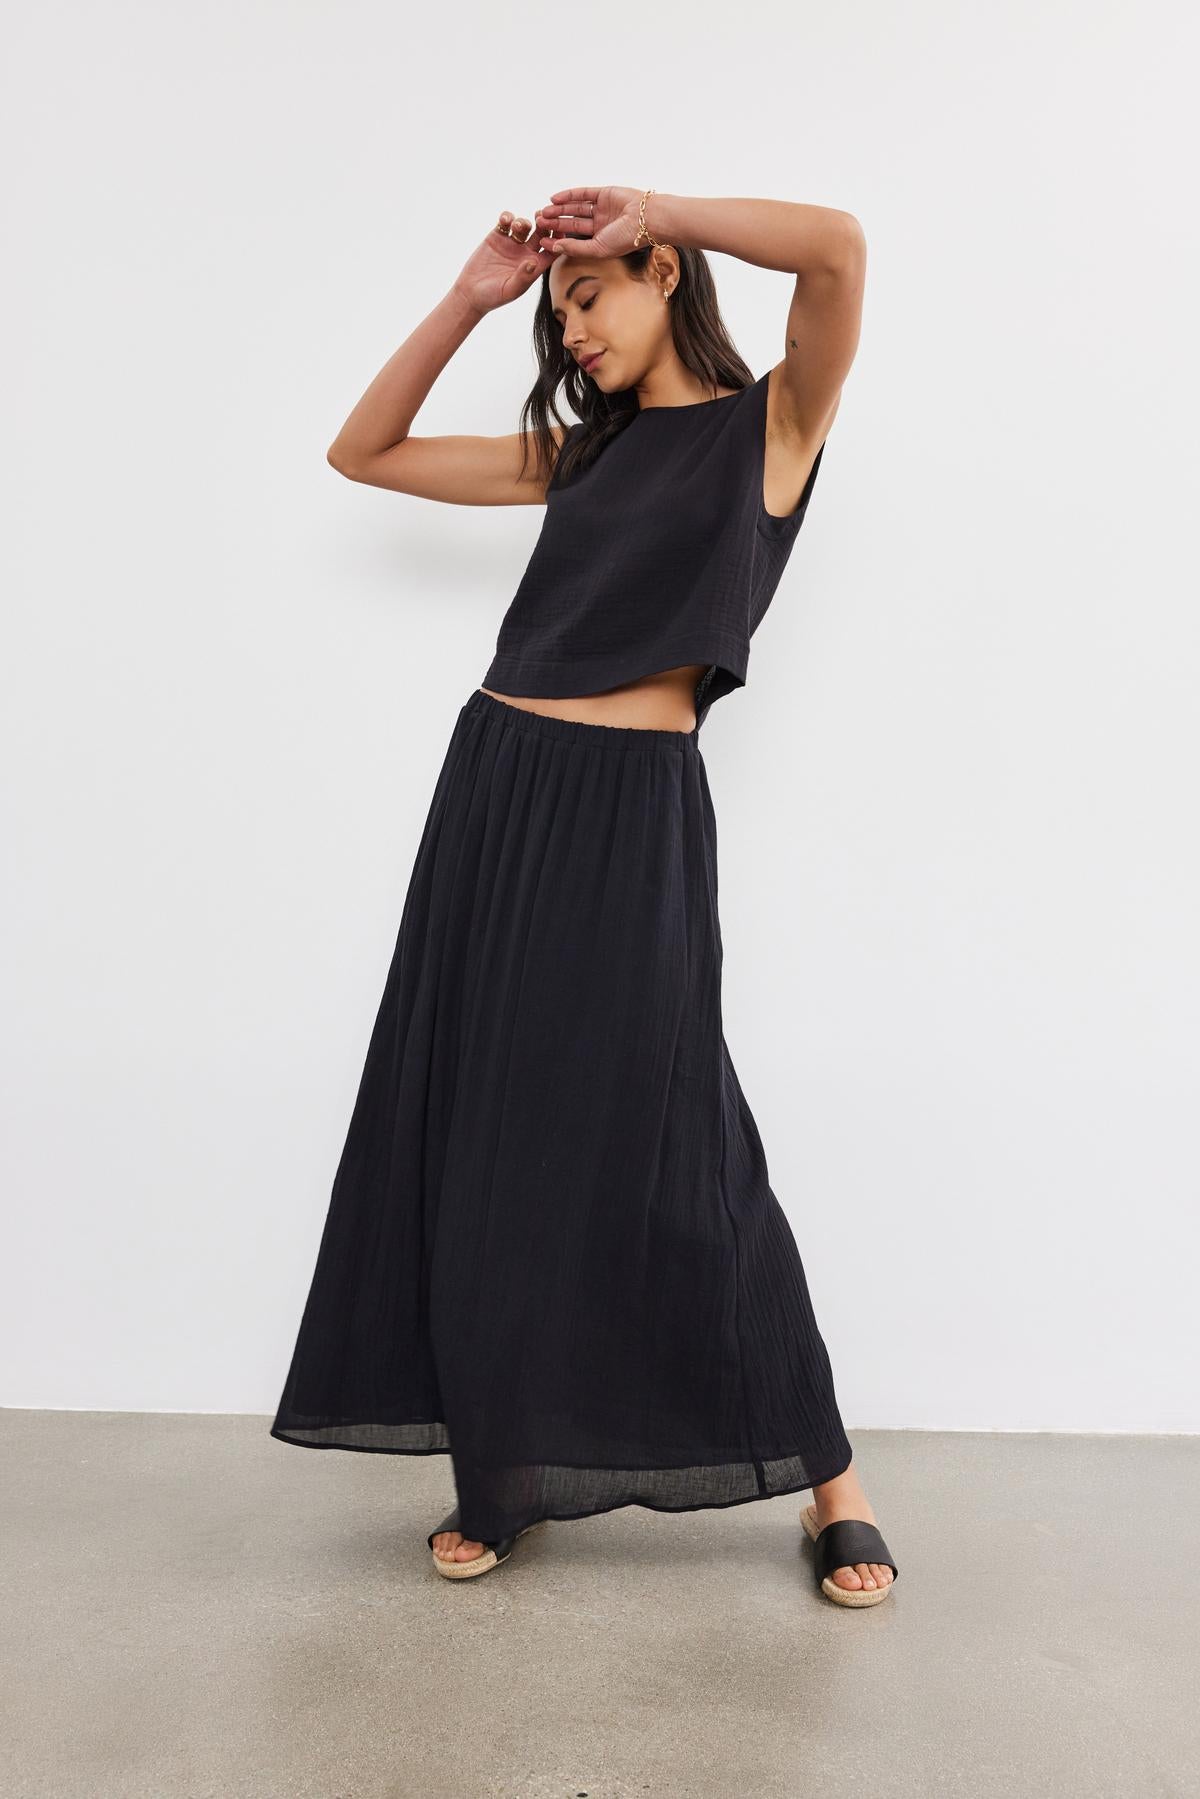   A woman in a black crop top and the Velvet by Graham & Spencer INDY COTTON GAUZE SKIRT poses in a studio, one hand raised to her forehead, looking downwards. 